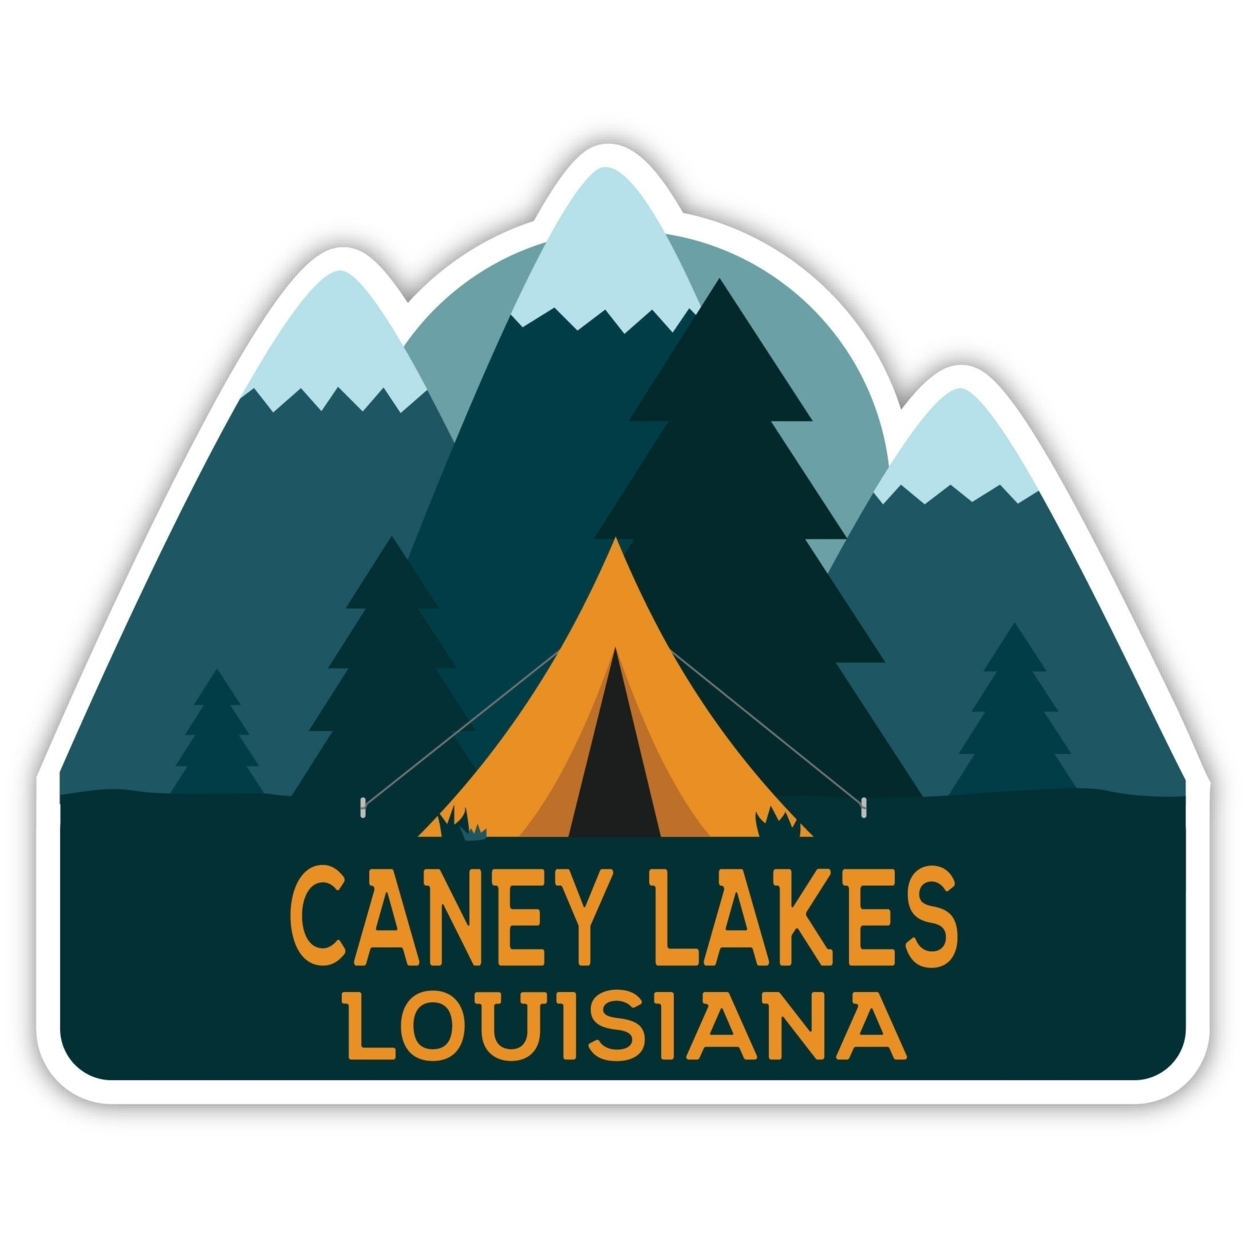 Caney Lakes Louisiana Souvenir Decorative Stickers (Choose Theme And Size) - 4-Pack, 8-Inch, Tent